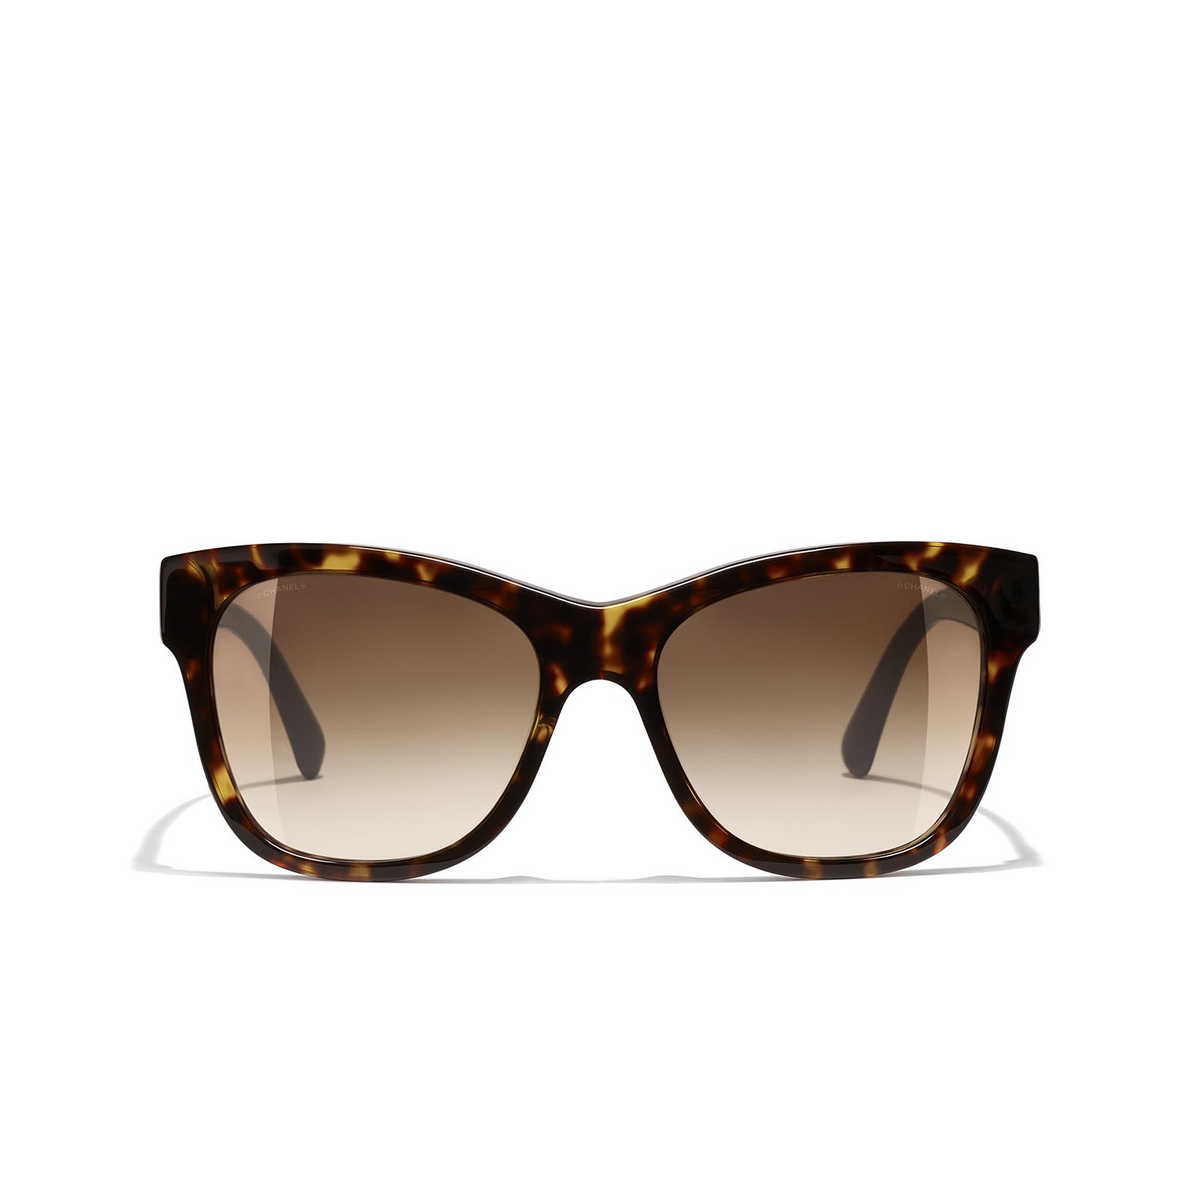 CHANEL square Sunglasses C714S5 Brown - front view